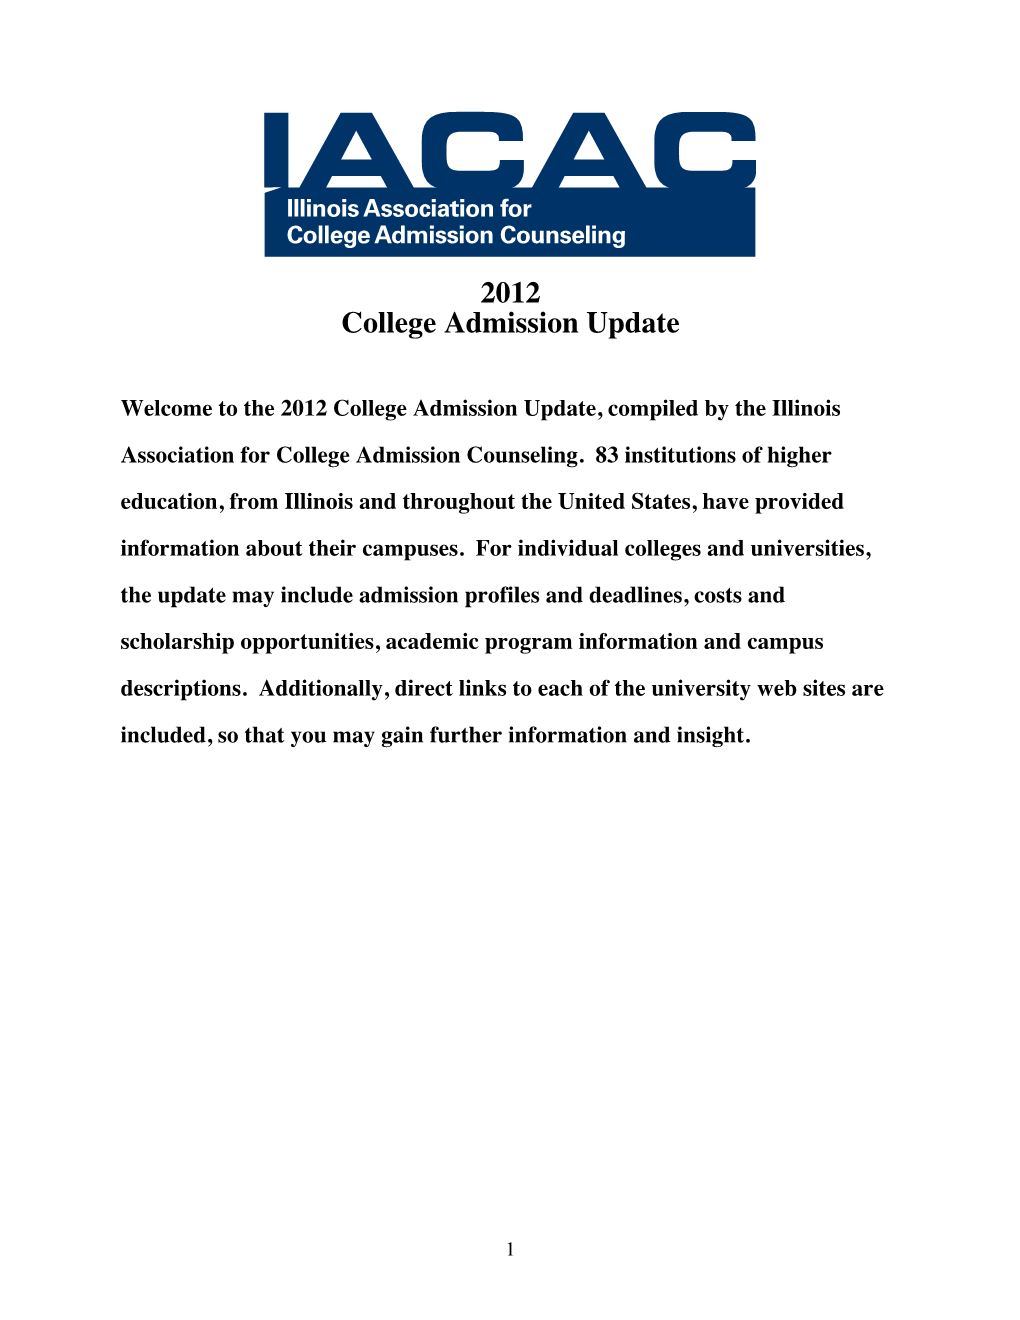 IACAC College Admission Update 2012